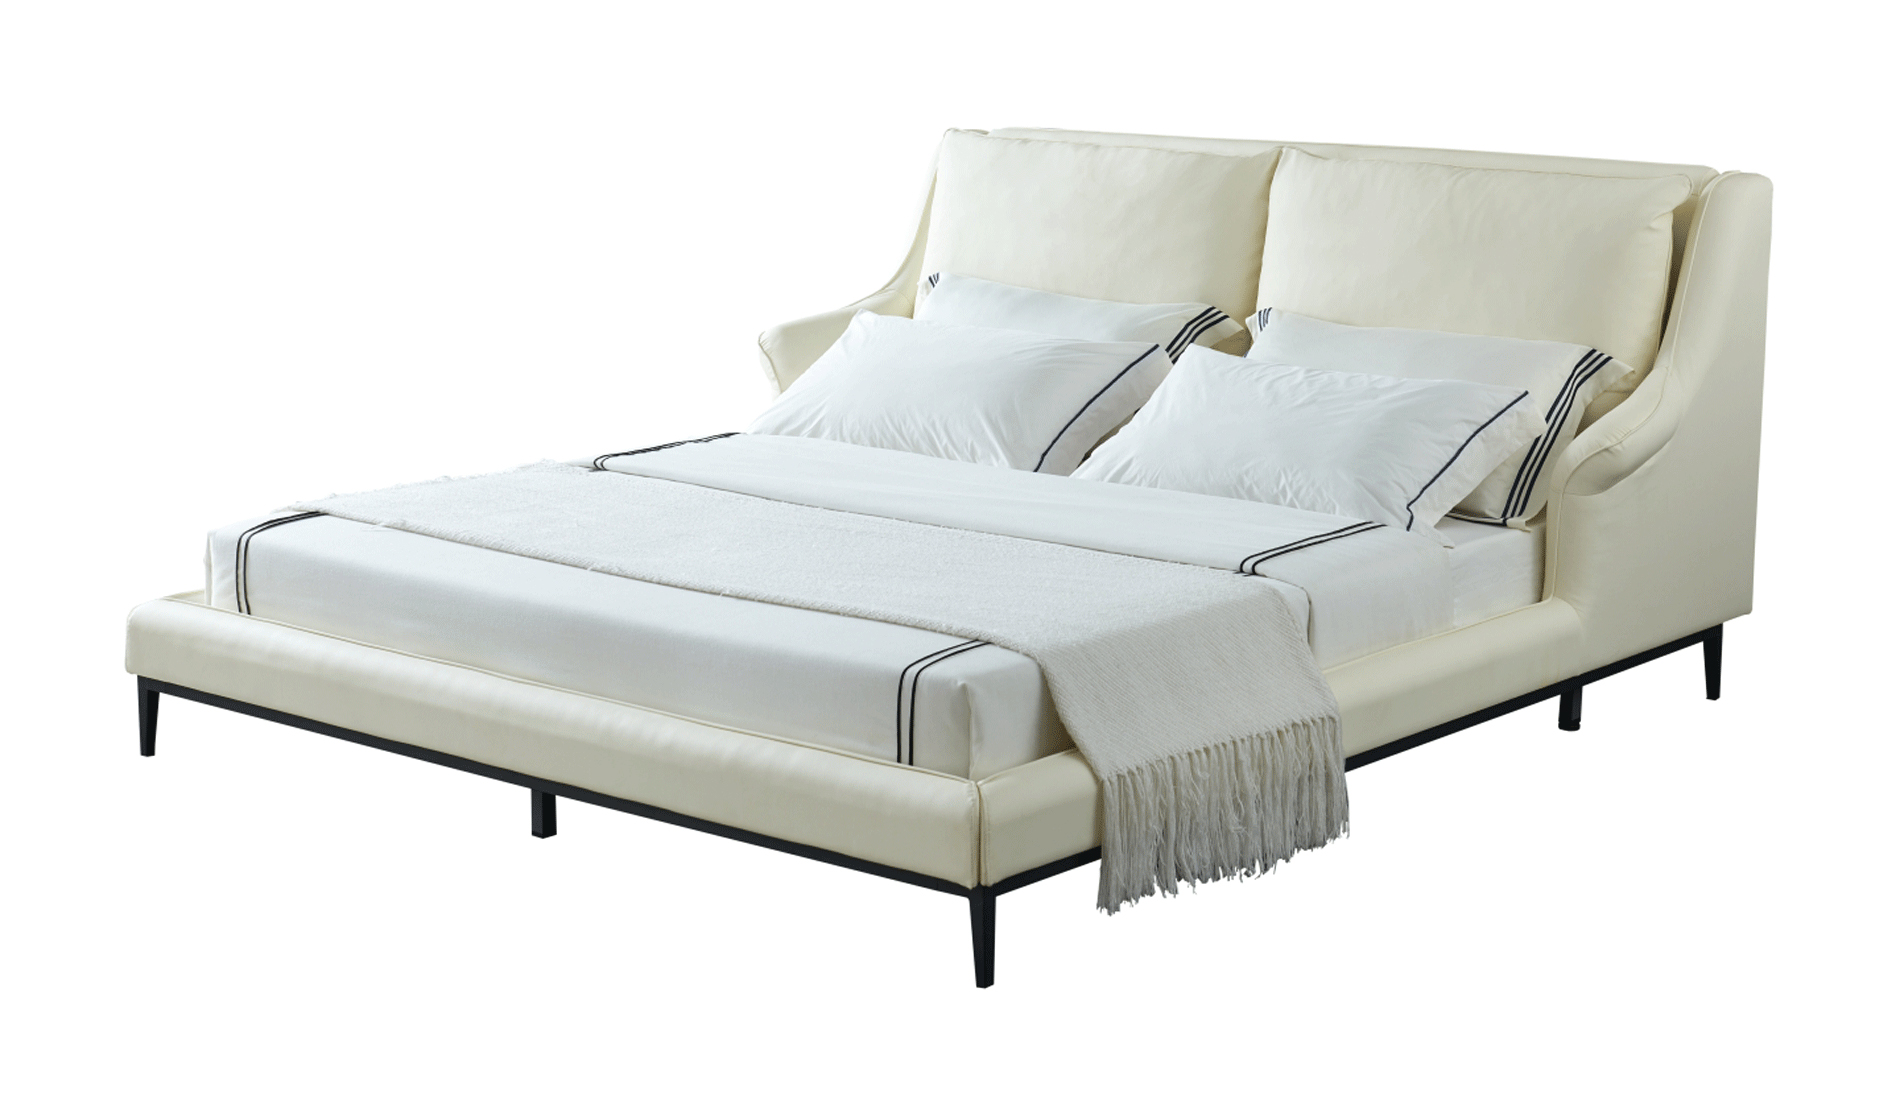 Clearance Living Room 6089 Bed European King